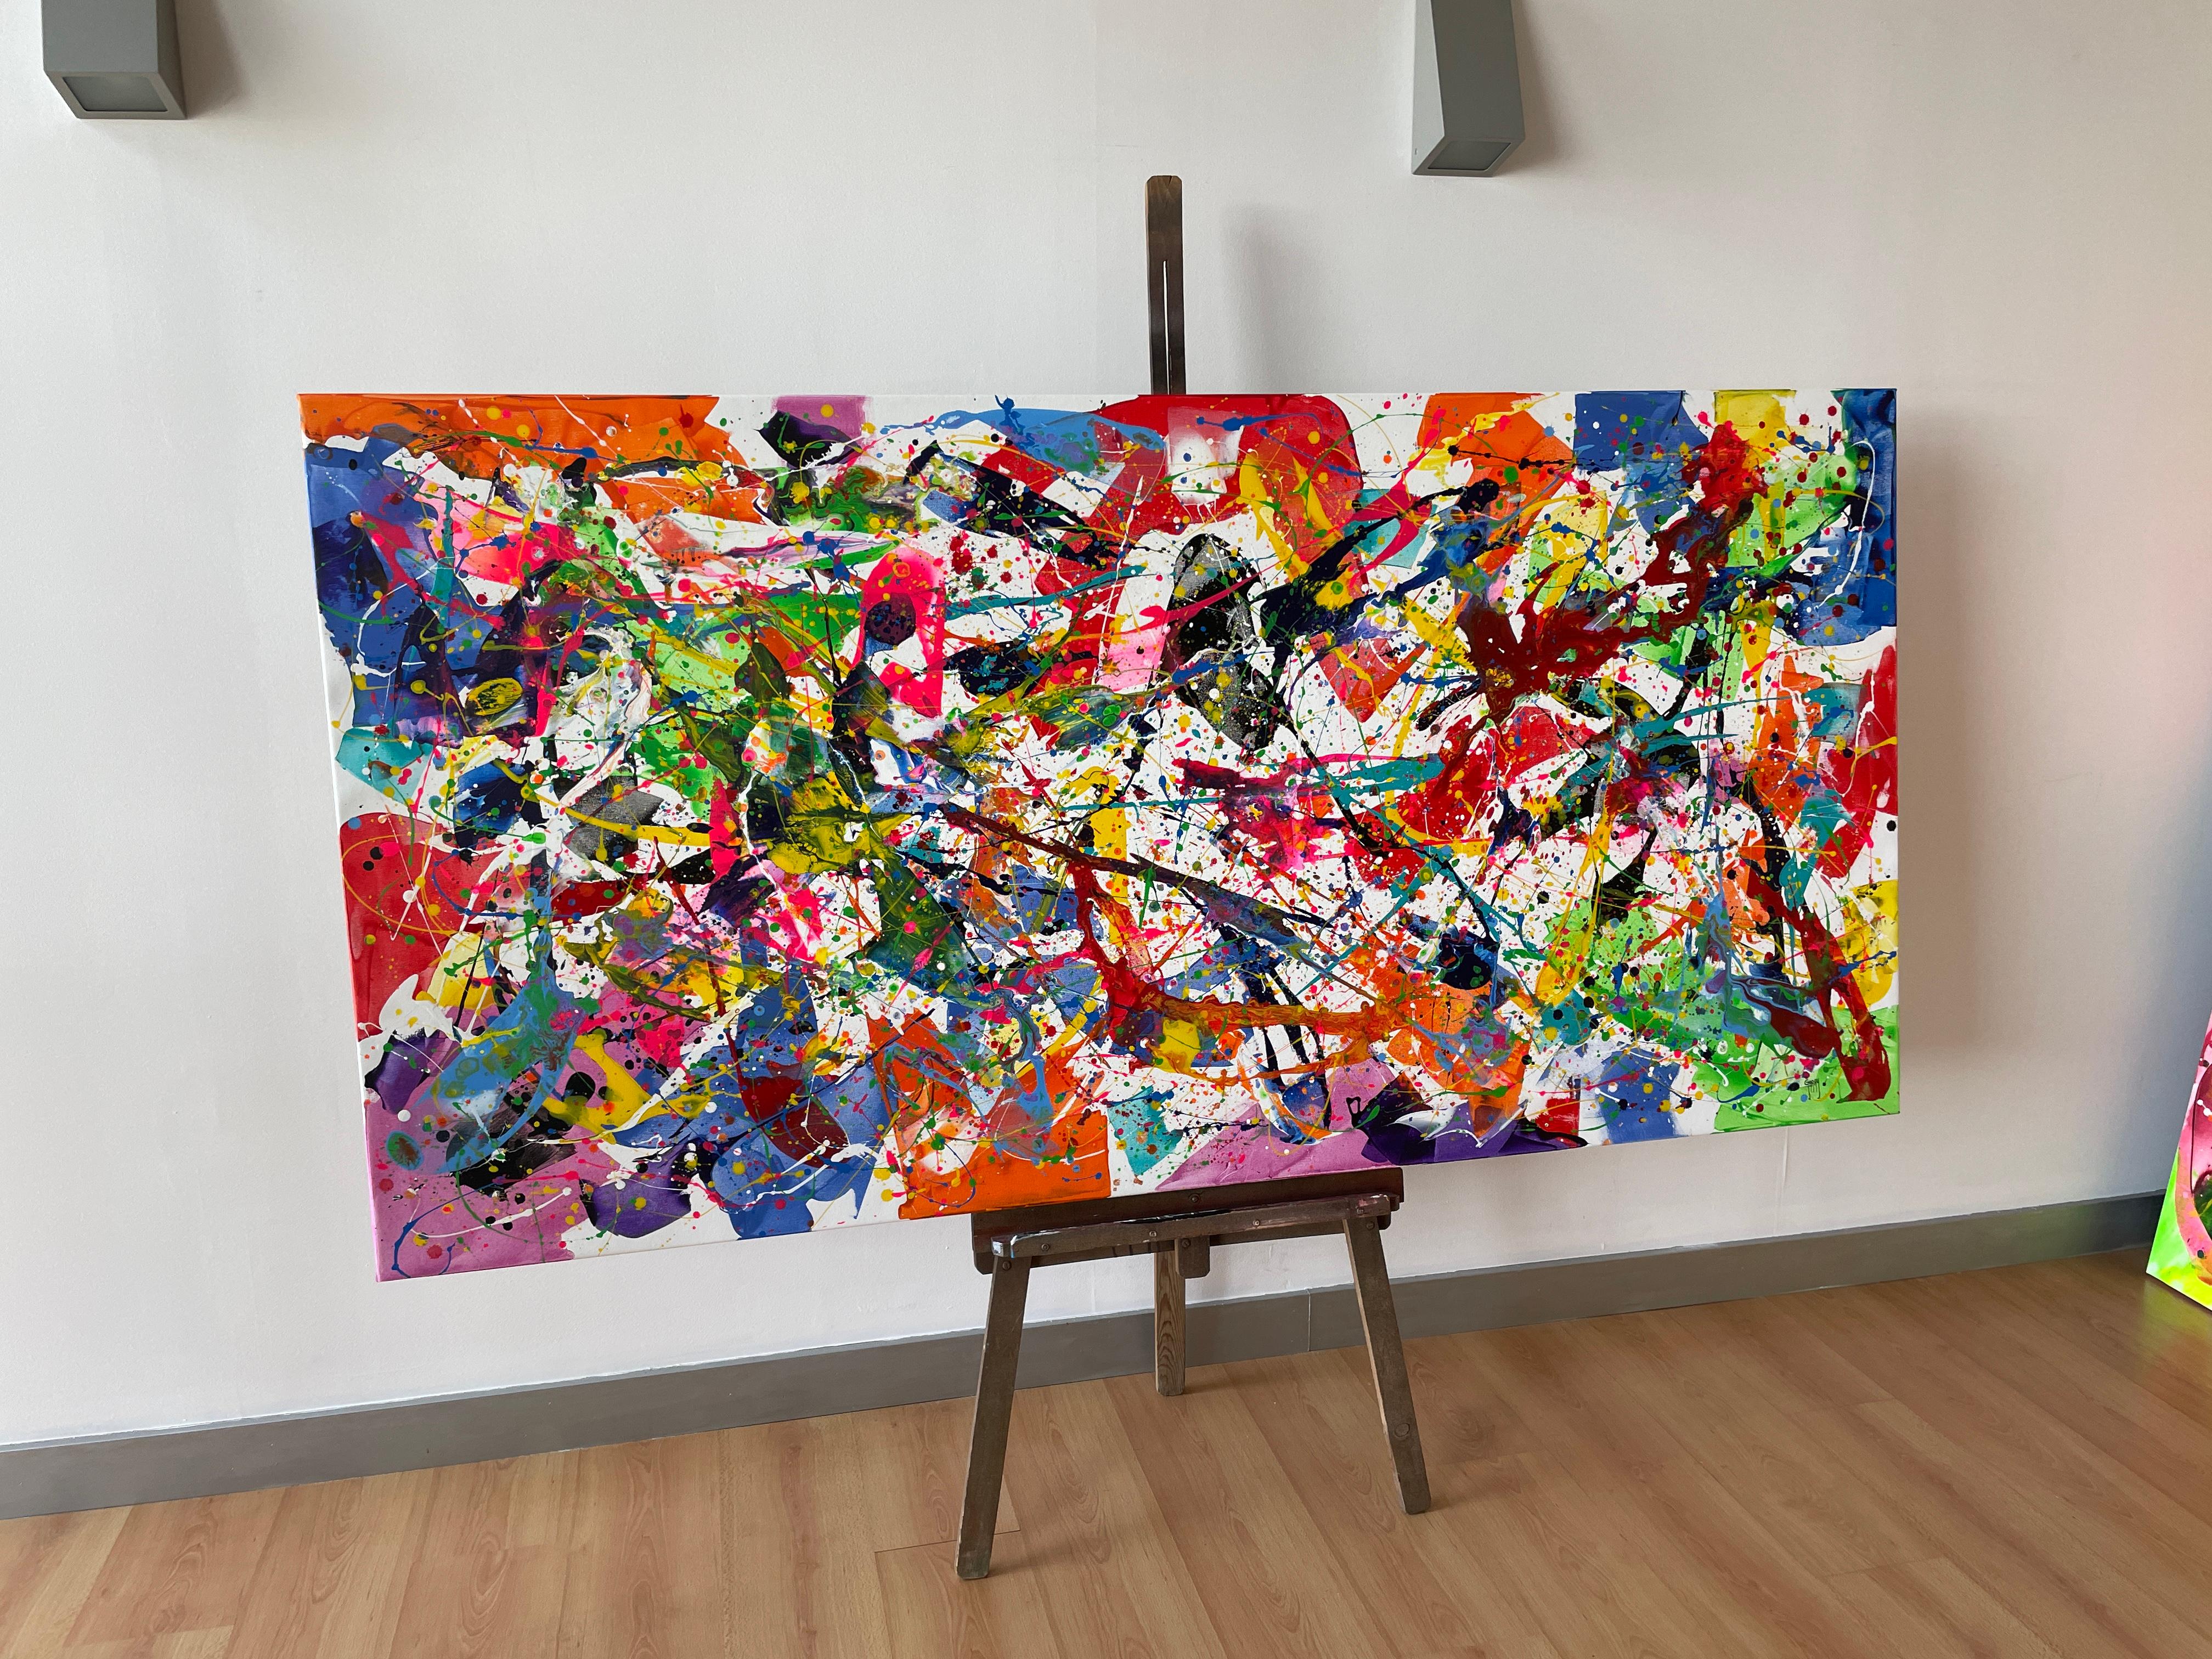 Due to the size of the work, it was sent rolled in a tube

Painting: Acrylic 

This large-sized painting is an impressive work of art that conveys a sense of movement and liveliness. The background of the painting is a pure and bright white, which